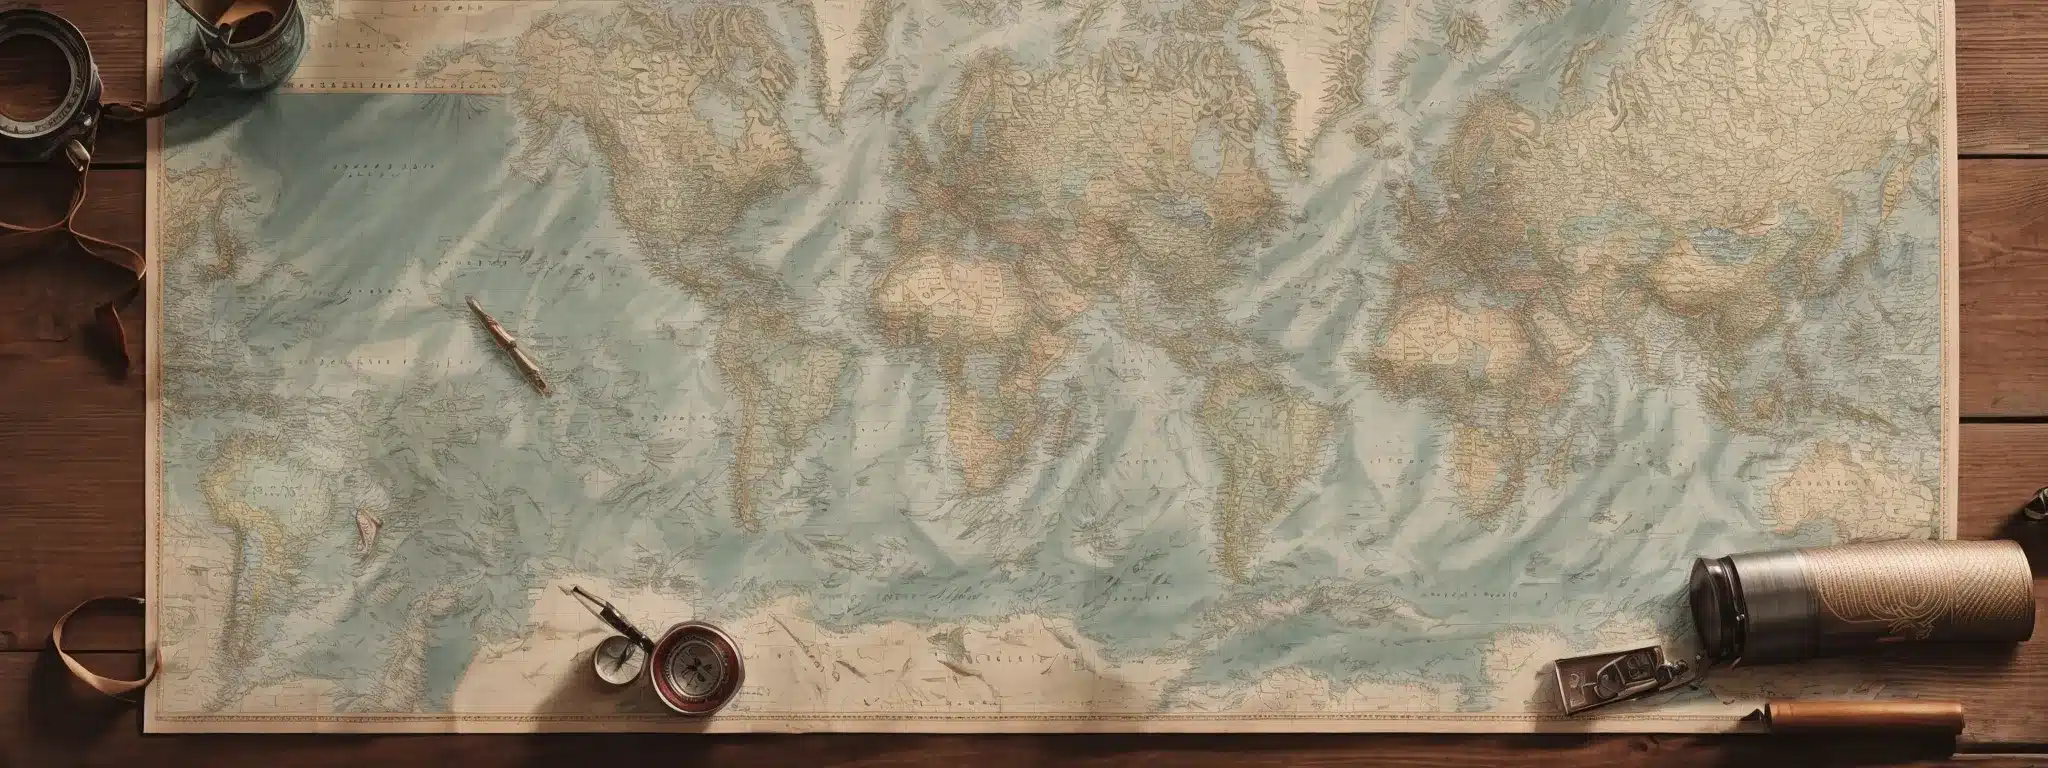 A Nautical Map Sprawled On A Wooden Table, Highlighting Coastal Landmarks And Charting Tools.